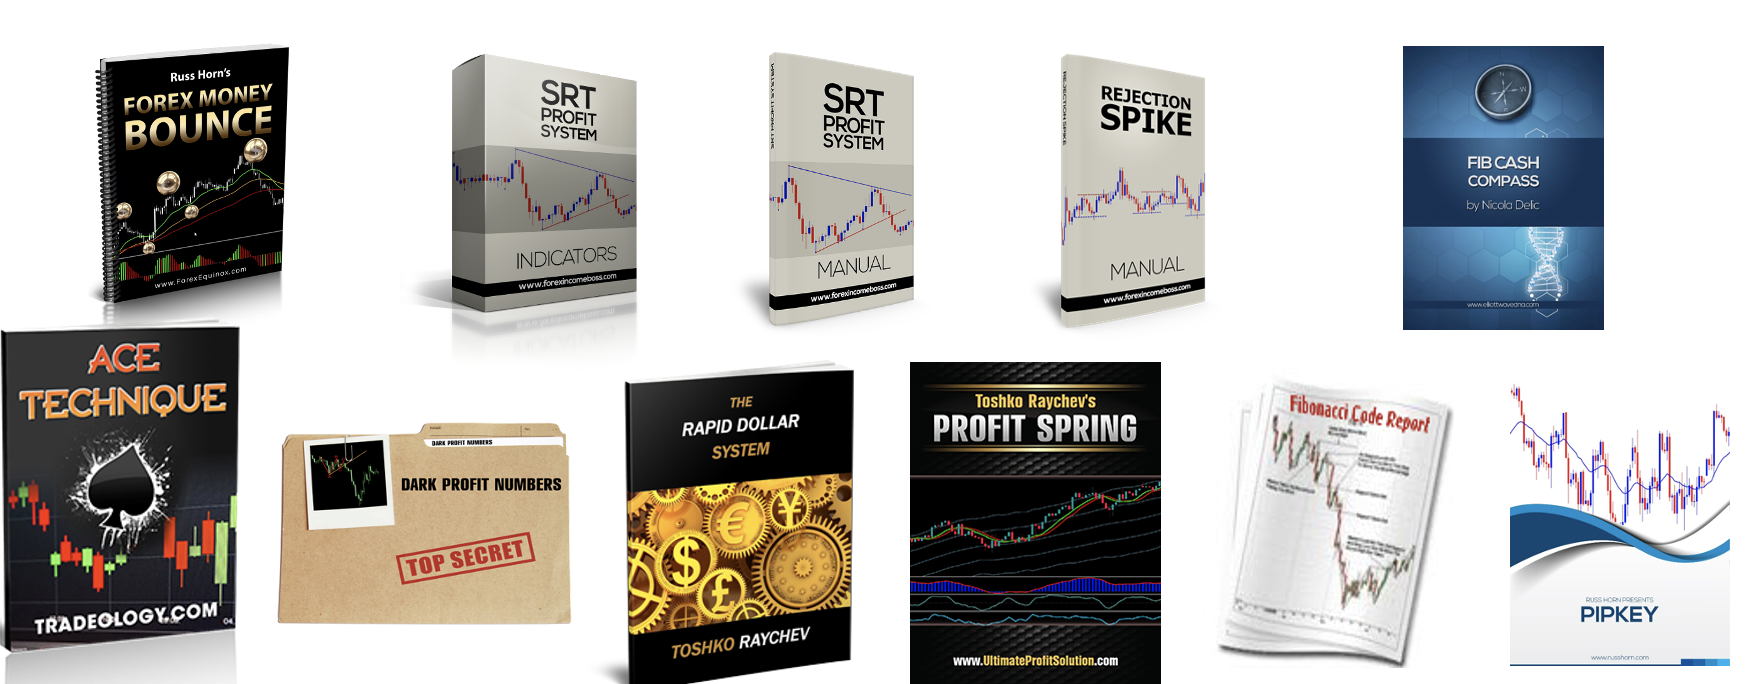 A group of books with graphs and charts

Description automatically generated